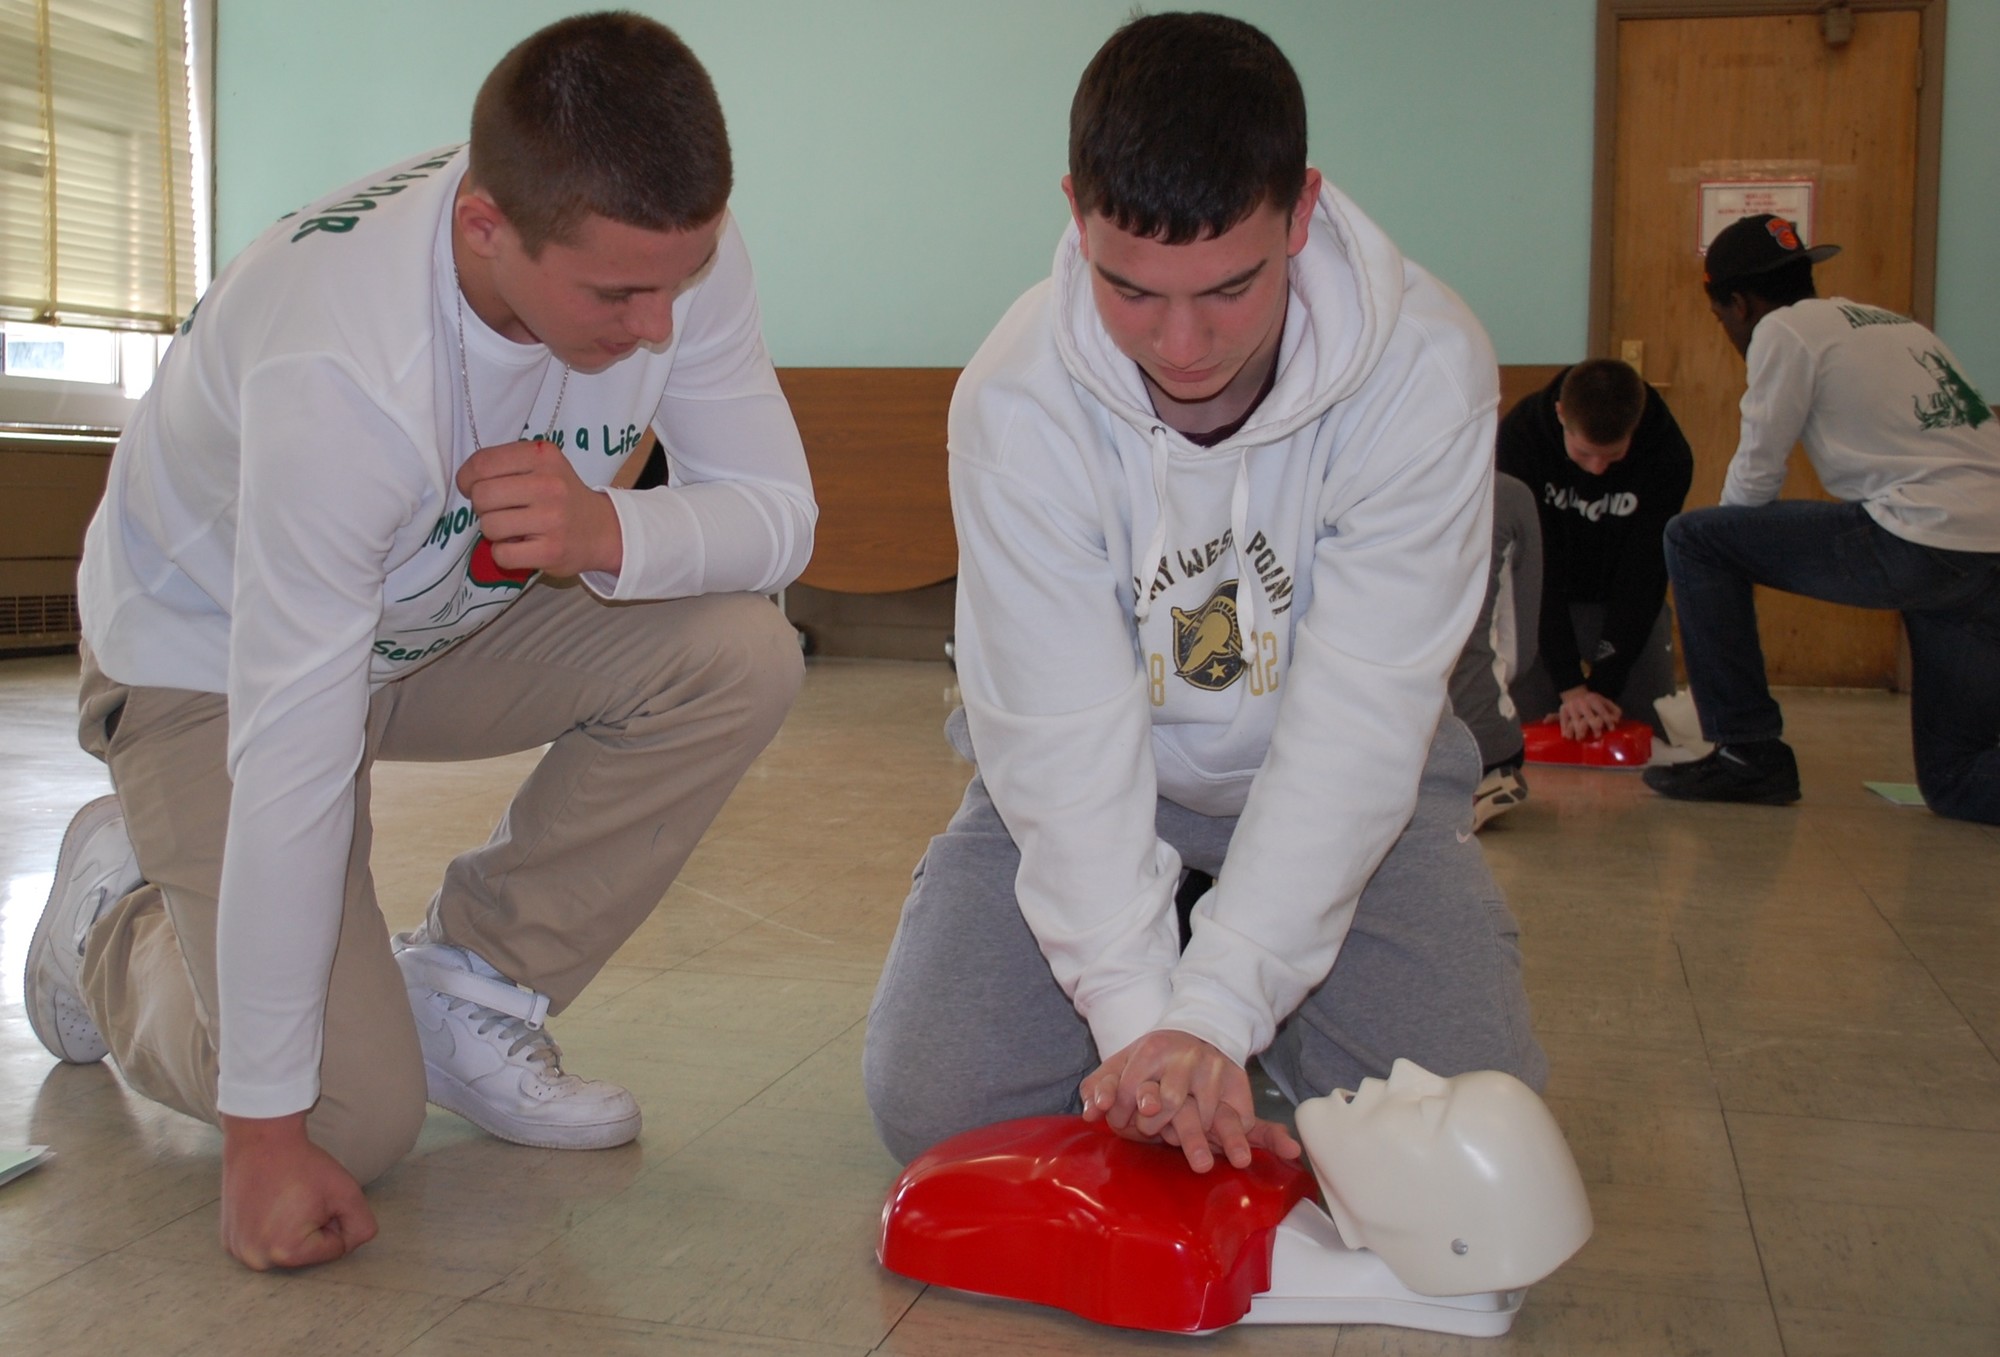 Ambassador Andrew Cain, left, a junior, showed Kevin Murphy how to do proper chest compressions when administering CPR.